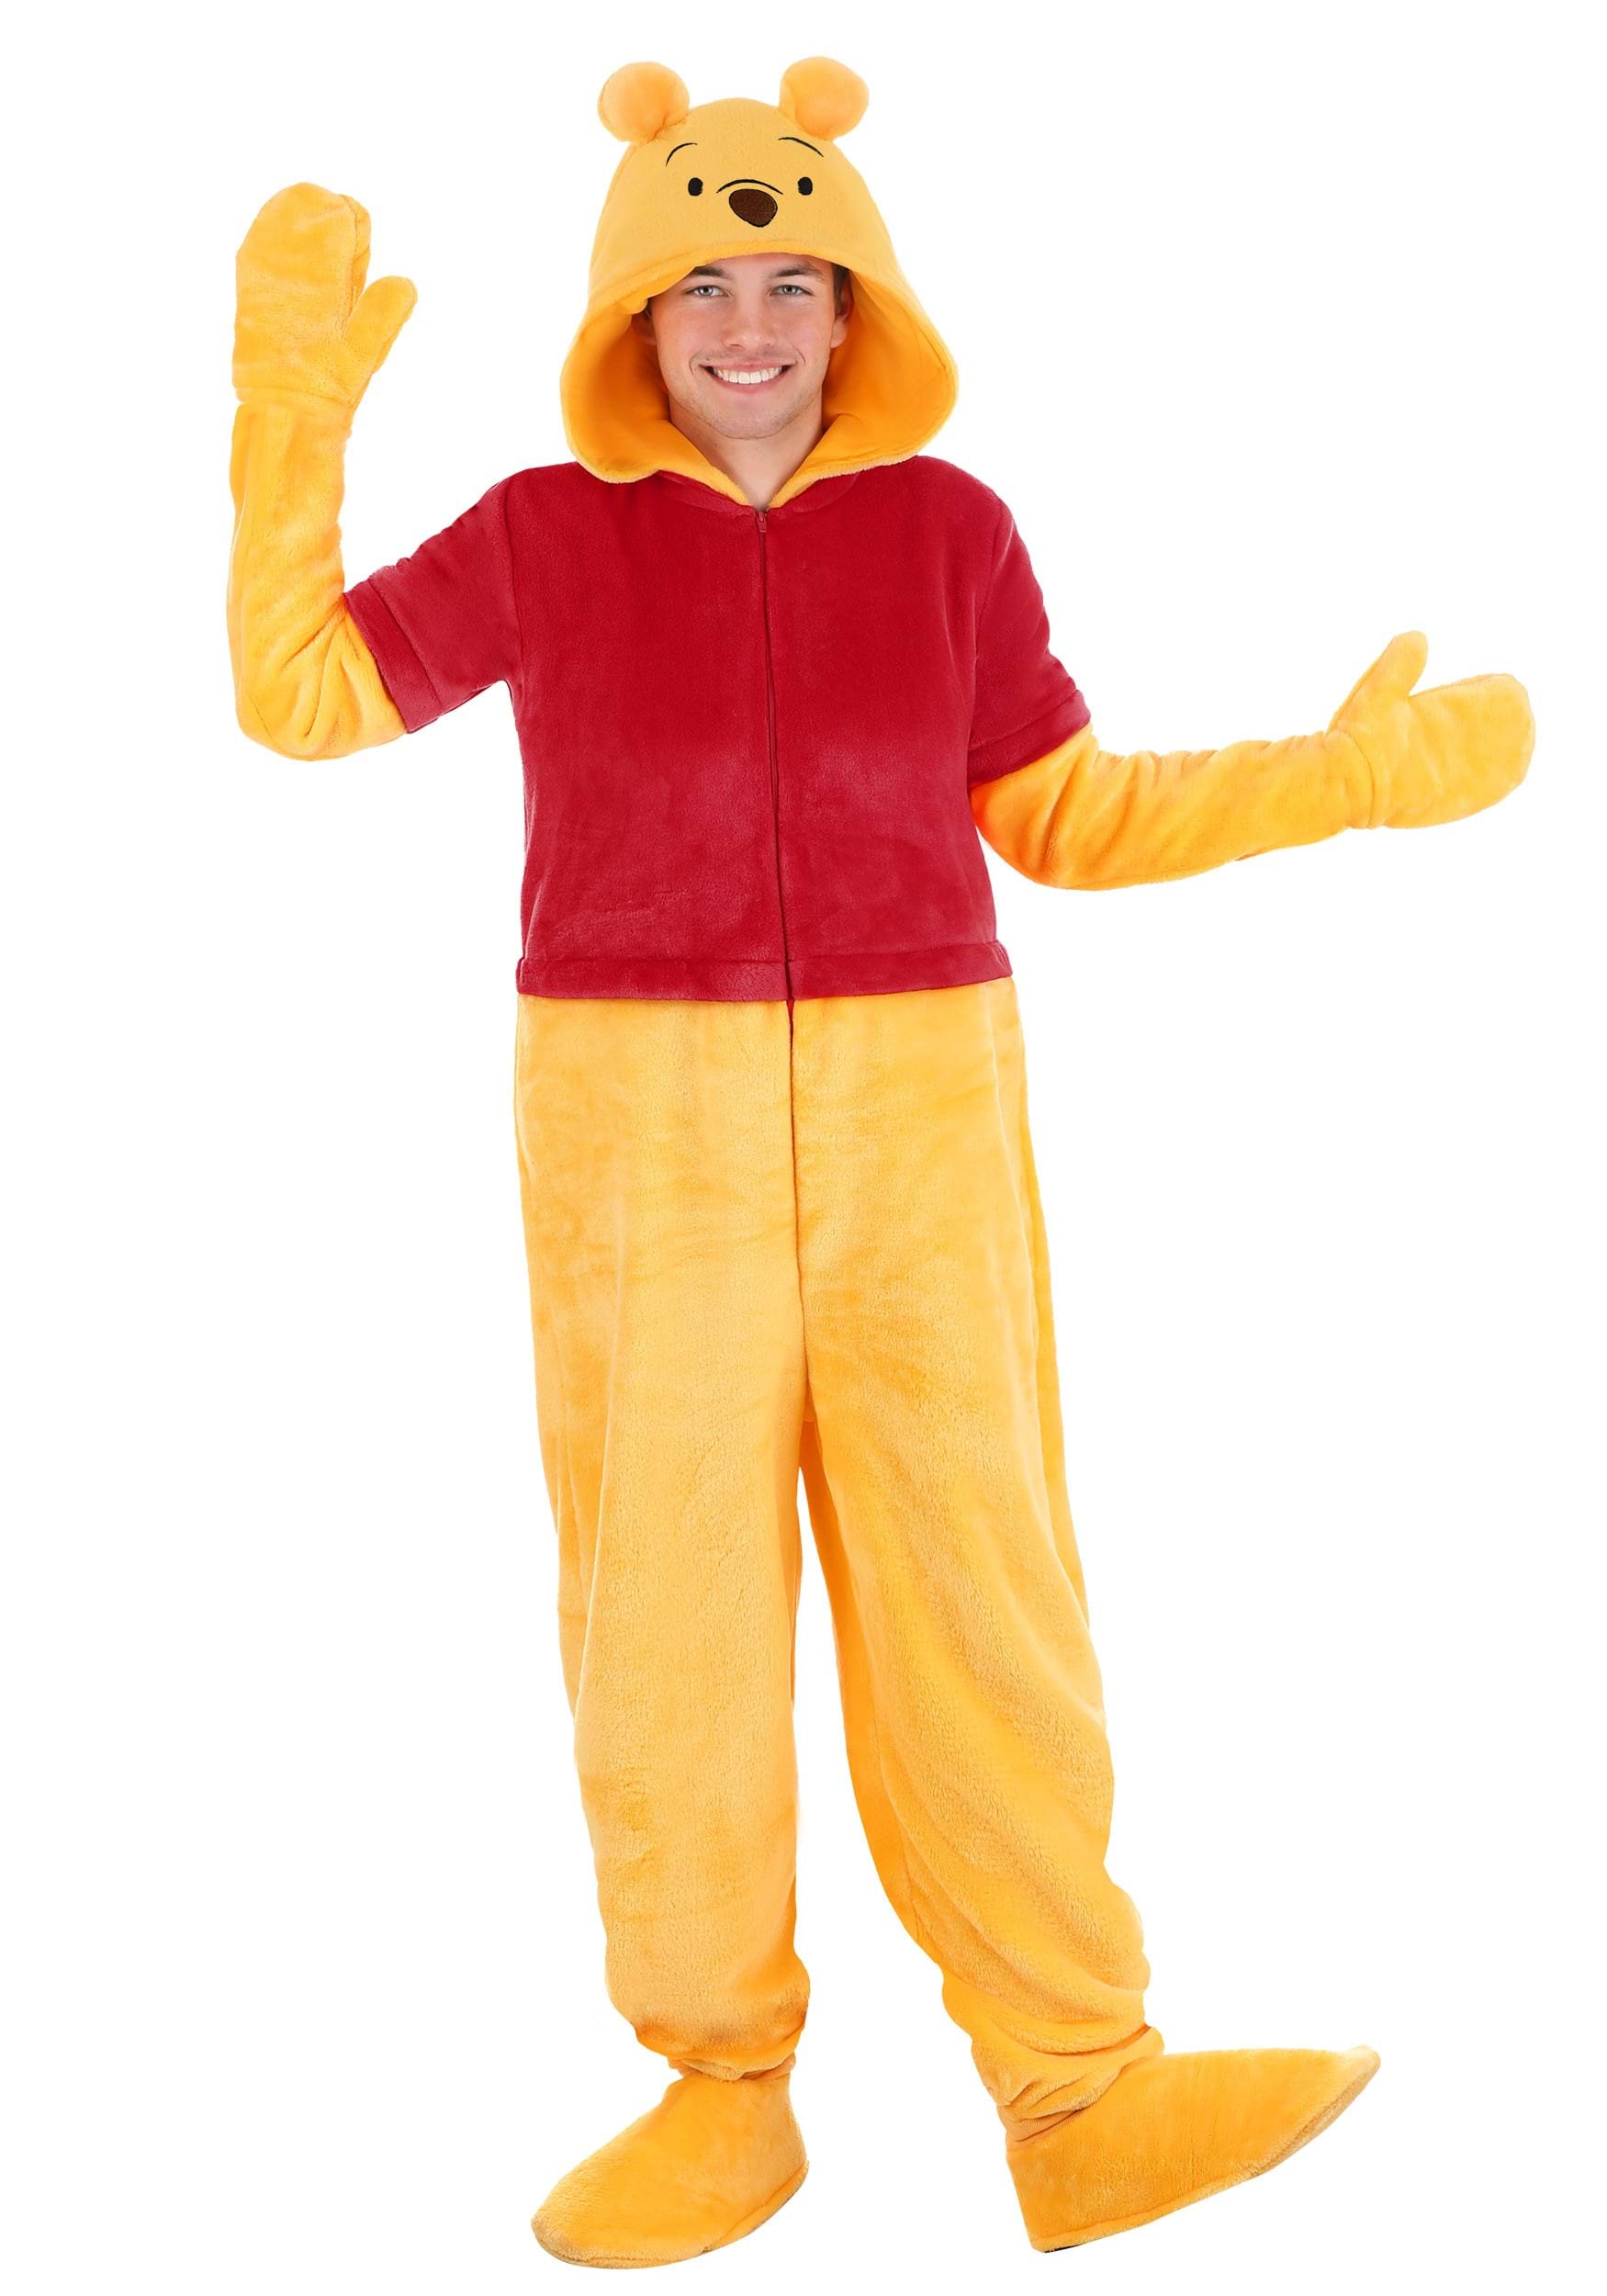 Image of Adult Deluxe Disney Winnie the Pooh Costume ID FUN4712AD-S